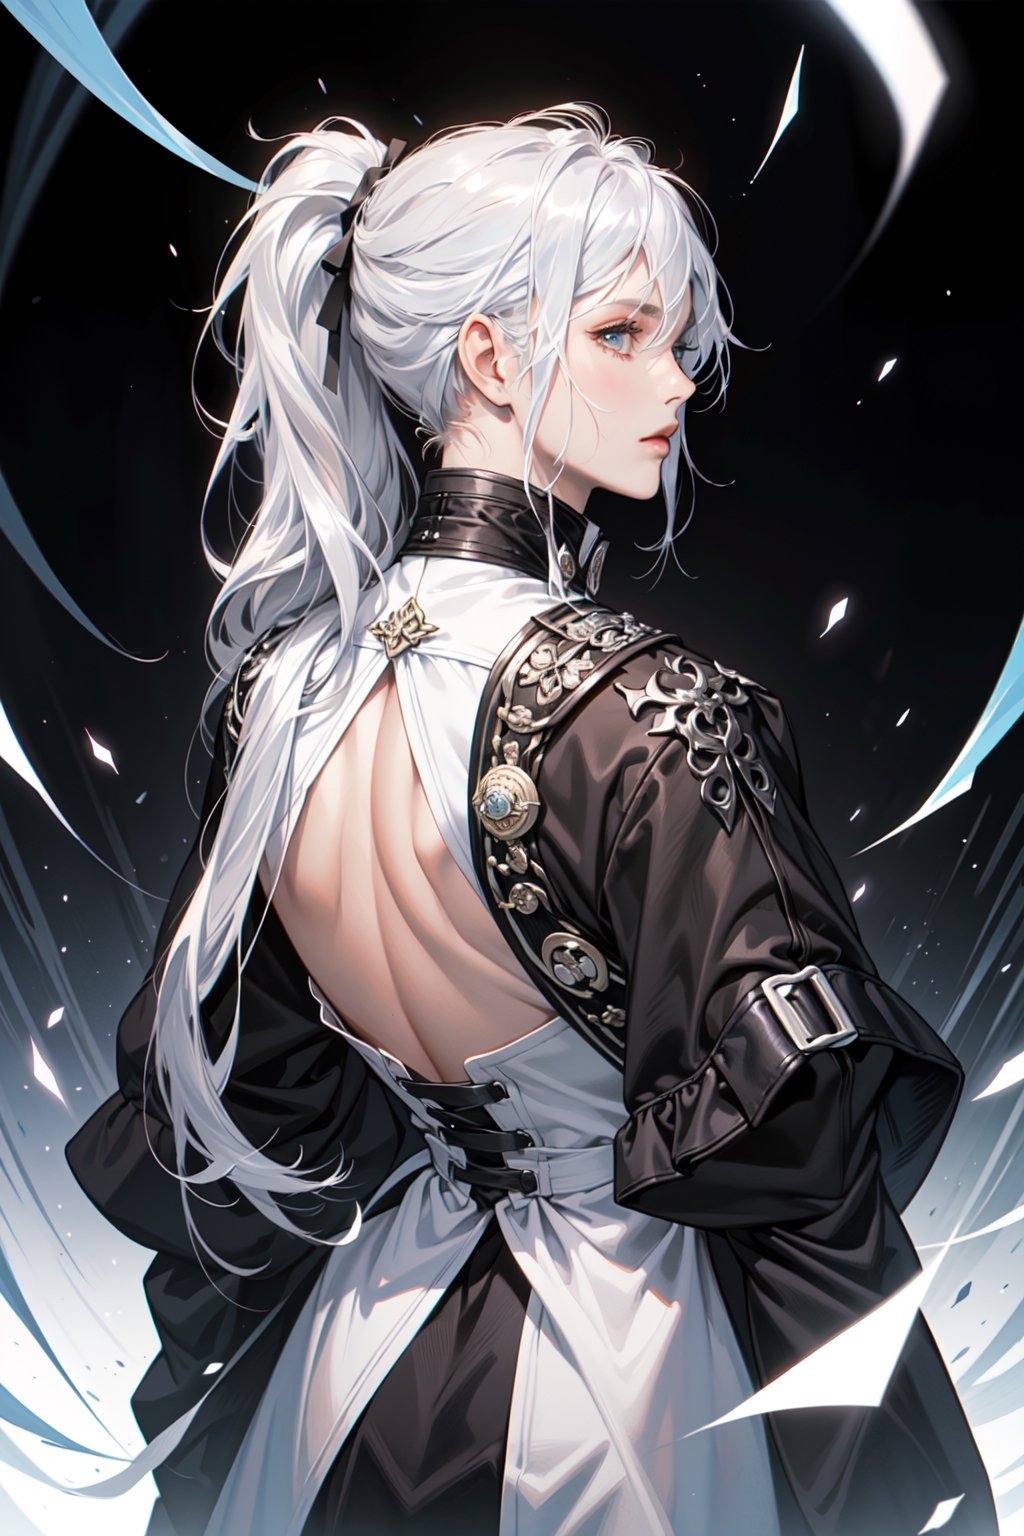 This image shows a person seen from behind. The person has 
he　head turned to the side and he　so long silvery-white hair is tied in a high ponytail. he is staring into the black distance and is wearing a long long-sleeved top and black gloves.

